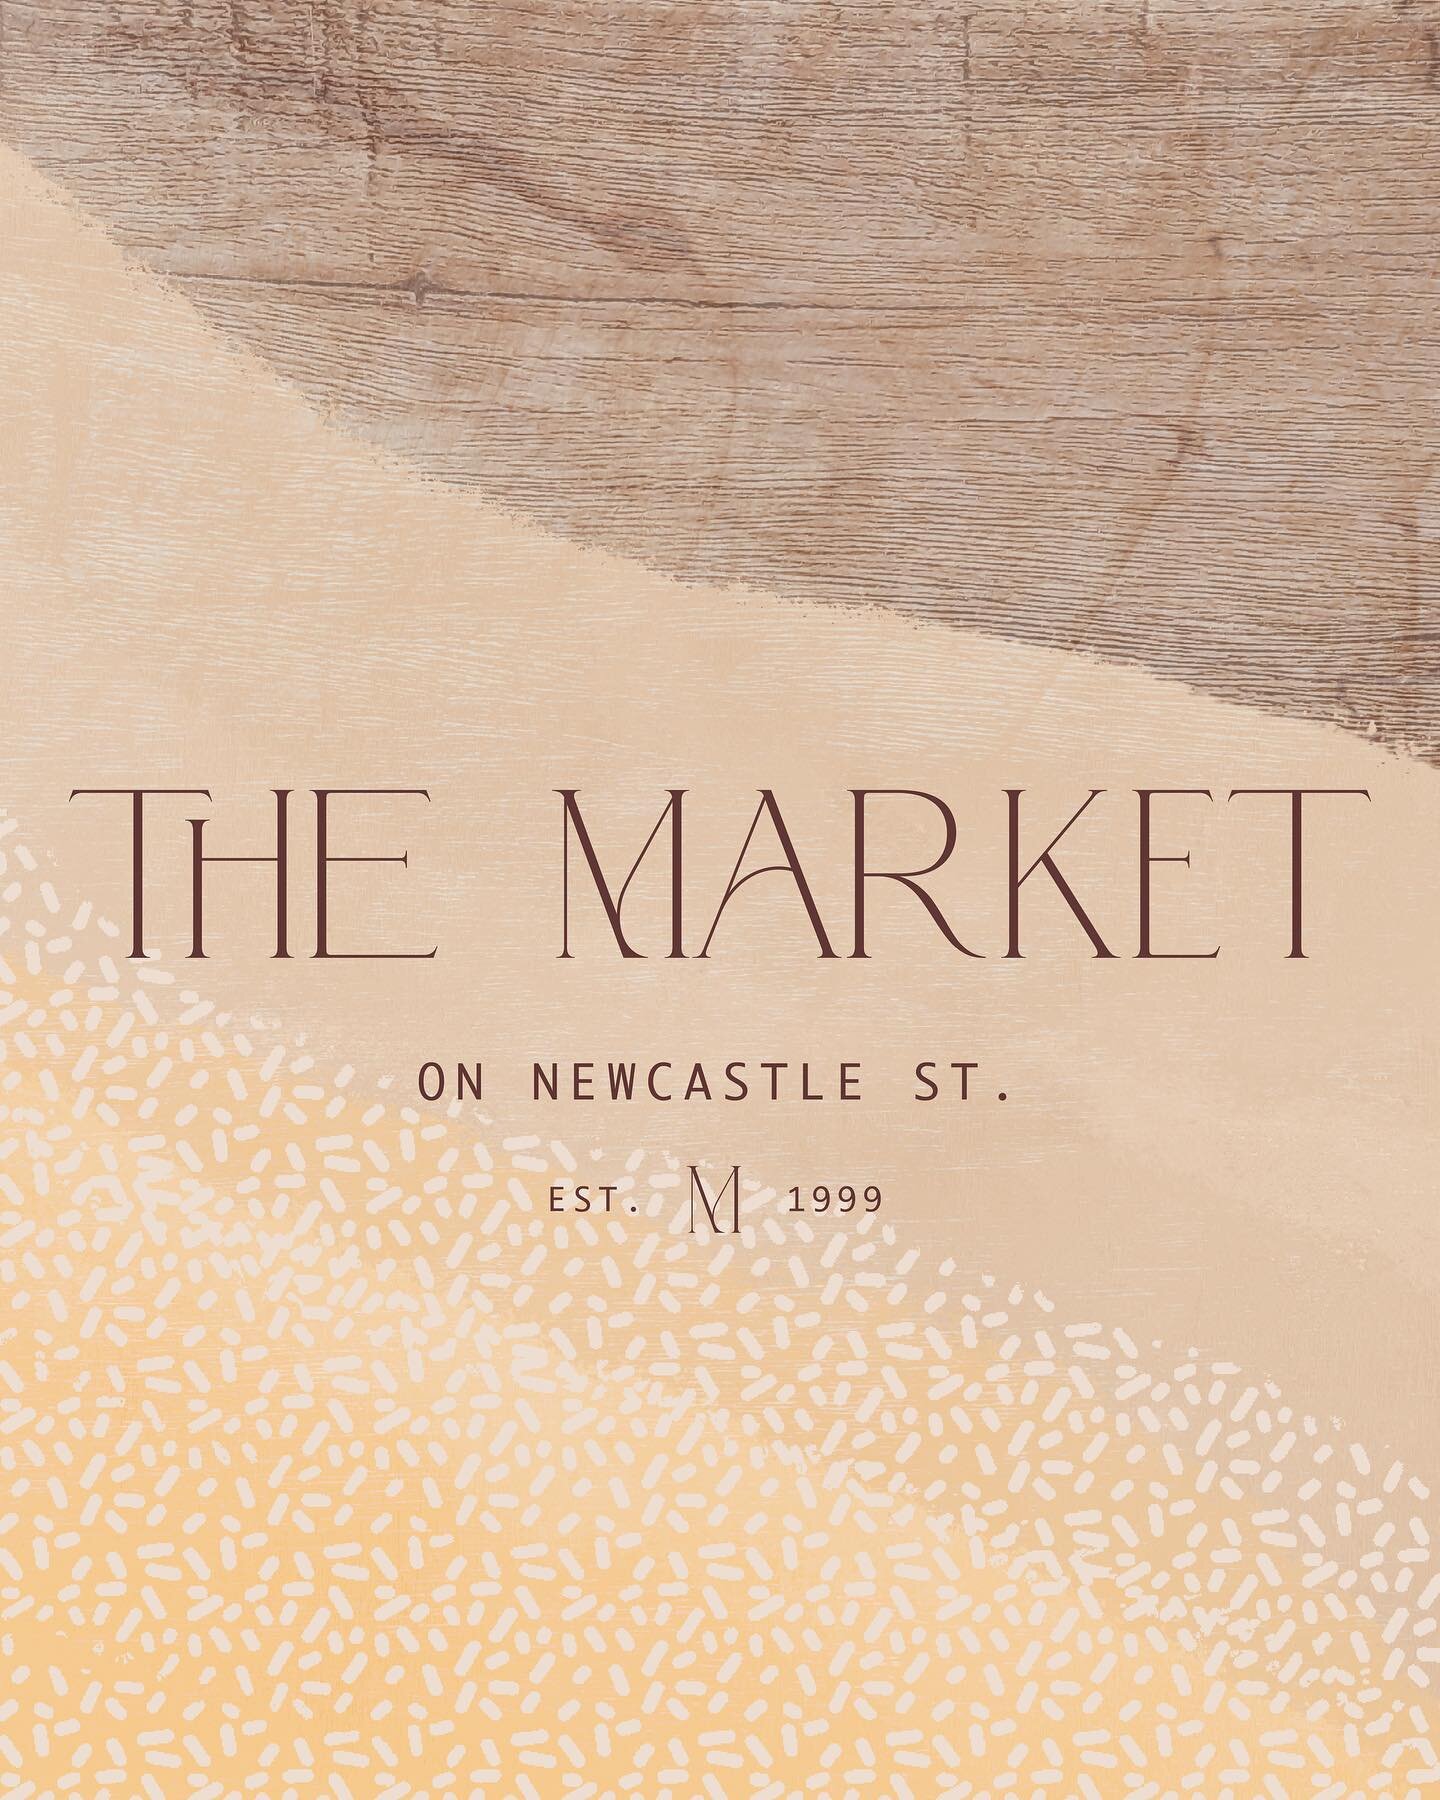 Brand design for @market_newcastle, a Georgia-based one of a kind furniture, gift, and decor shop!

We wanted to create a brand that felt warm, nostalgic, and welcoming that fully reflected this new era of the store. I love how this project turned ou